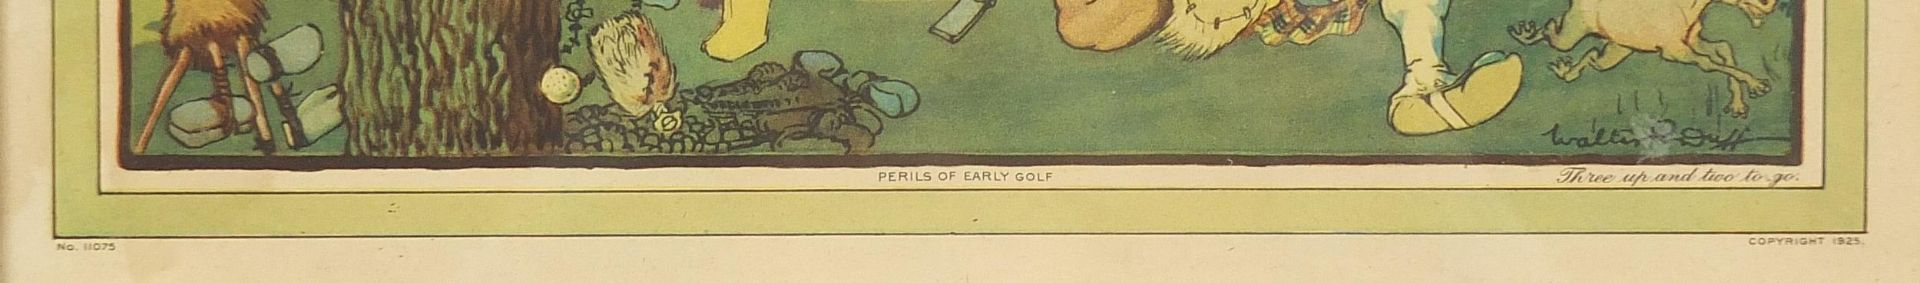 After Walter R Duff - The Perils of Early Golf, set of three golfing interest prints in colour - Image 4 of 13